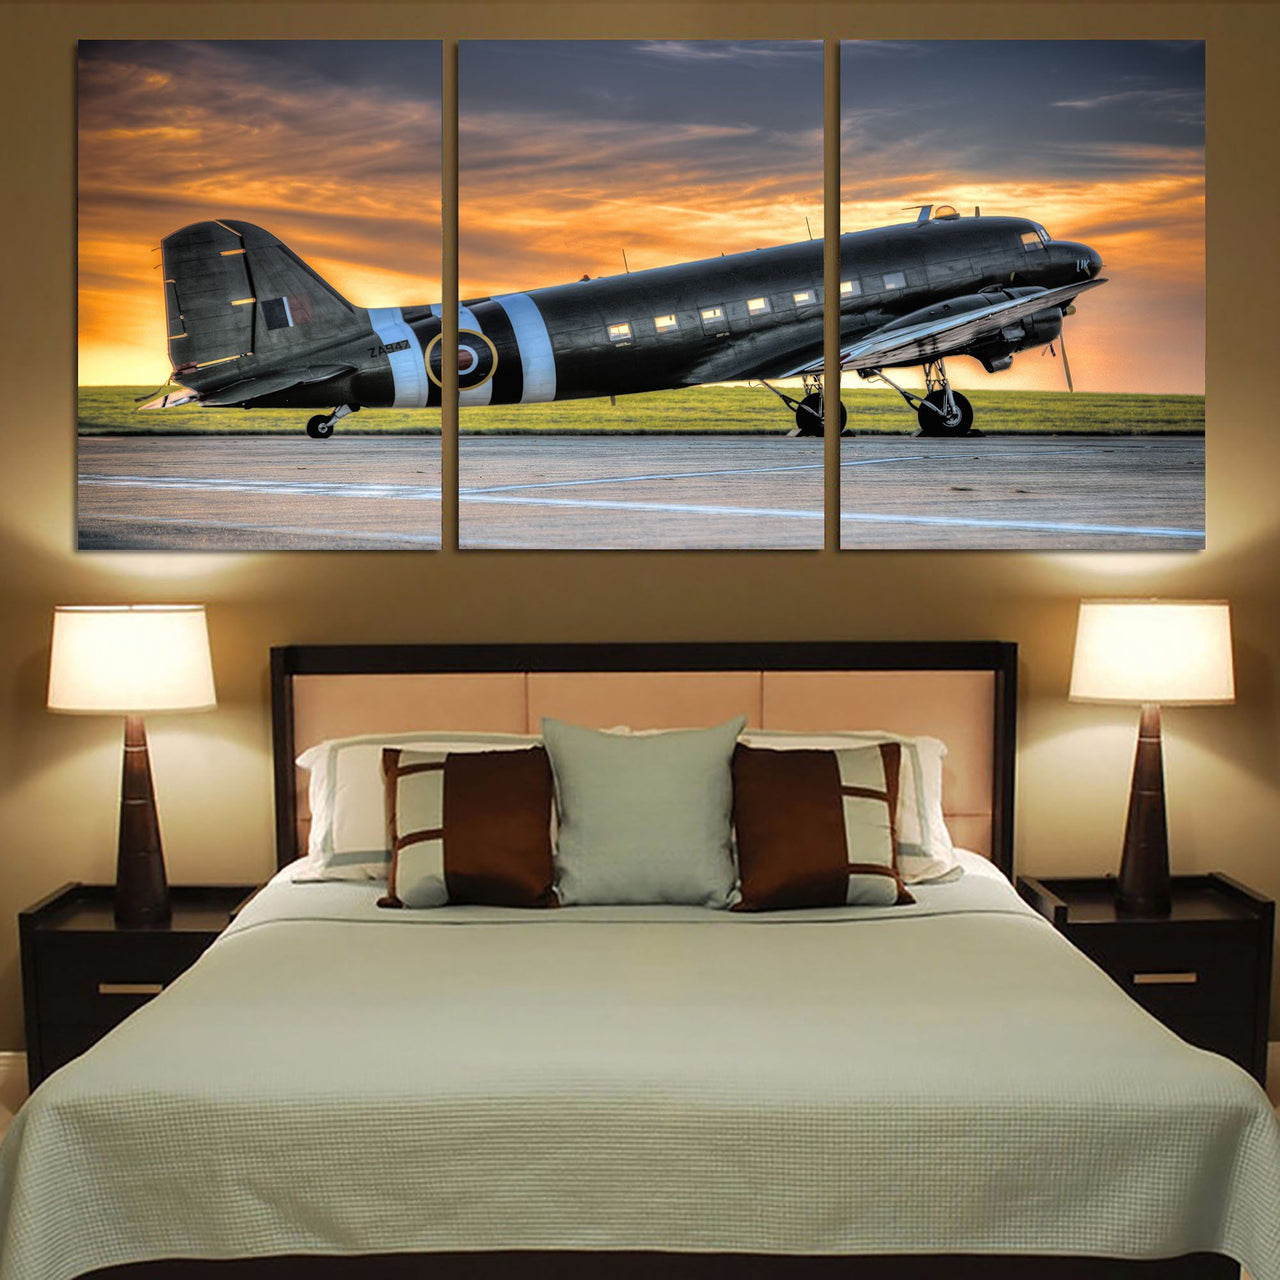 Old Airplane Parked During Sunset Printed Canvas Posters (3 Pieces) Aviation Shop 